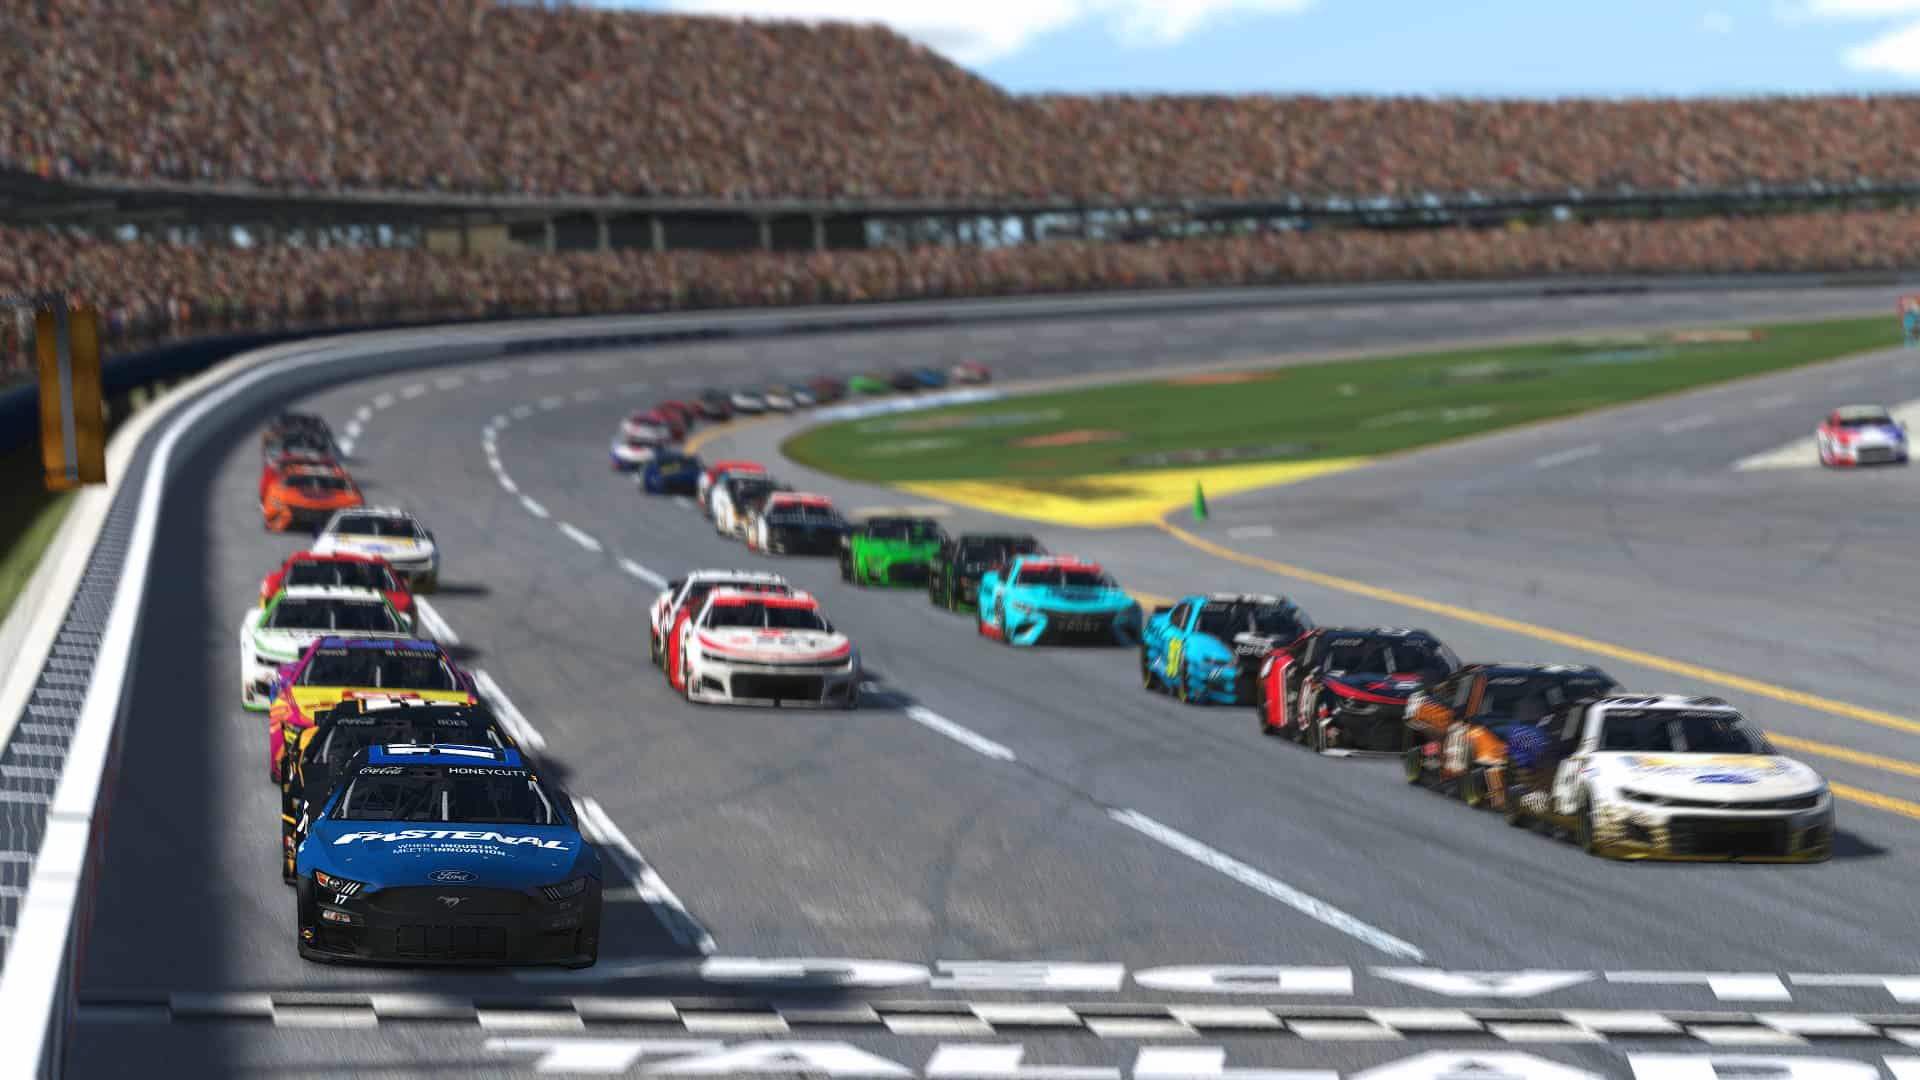 Kaden Honeycutt pushed through the loss of his grandfather to score a career best finish in the eNASCAR Coca-Cola iRacing Series at Talladega Superspeedway.